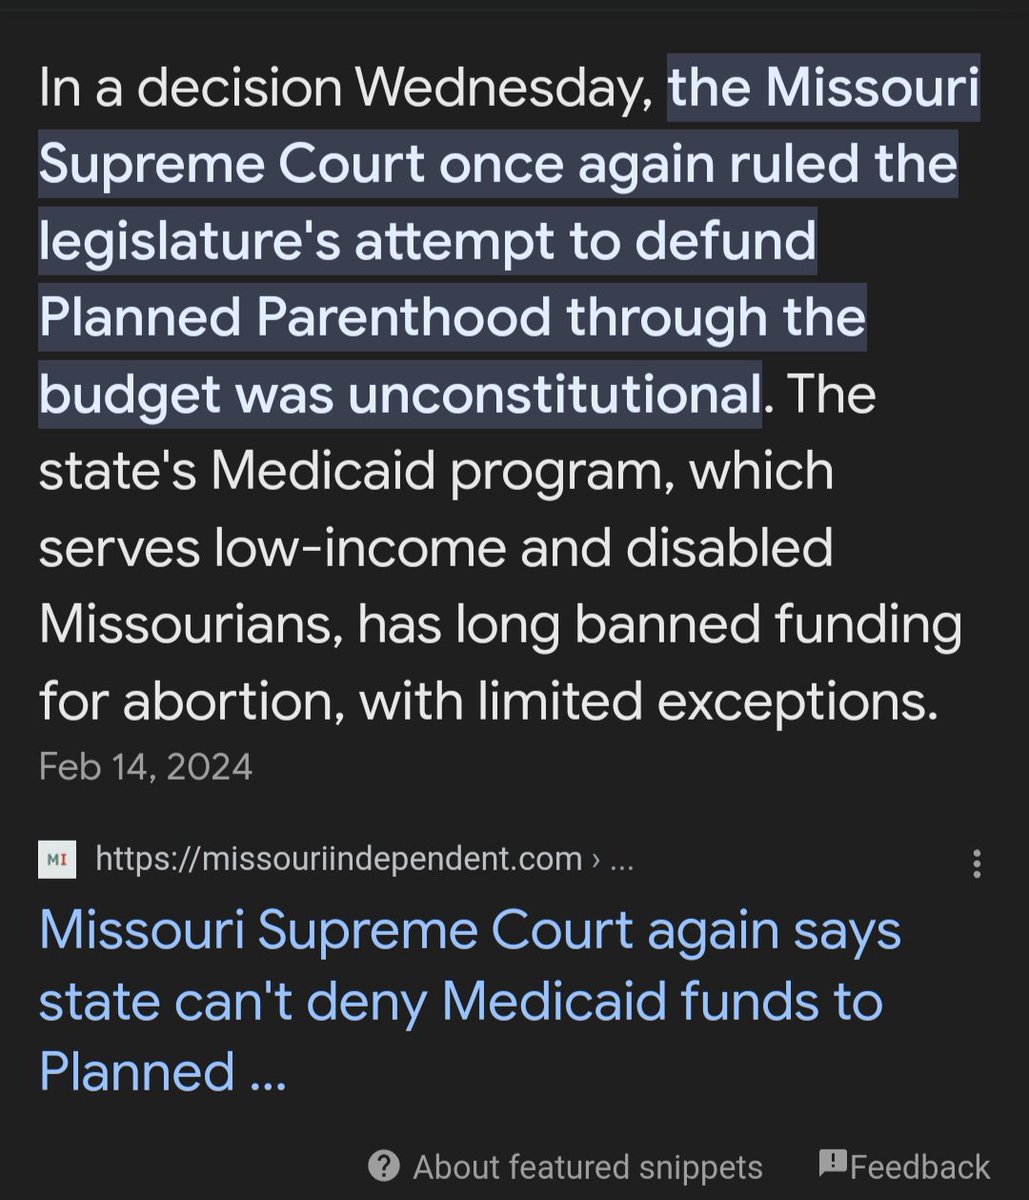 The State Supreme Court already told you fuckers your bill was UNCONSTITUTIONAL back in February of this year. Why is it so hard for you to understand the Constitution, Mary?